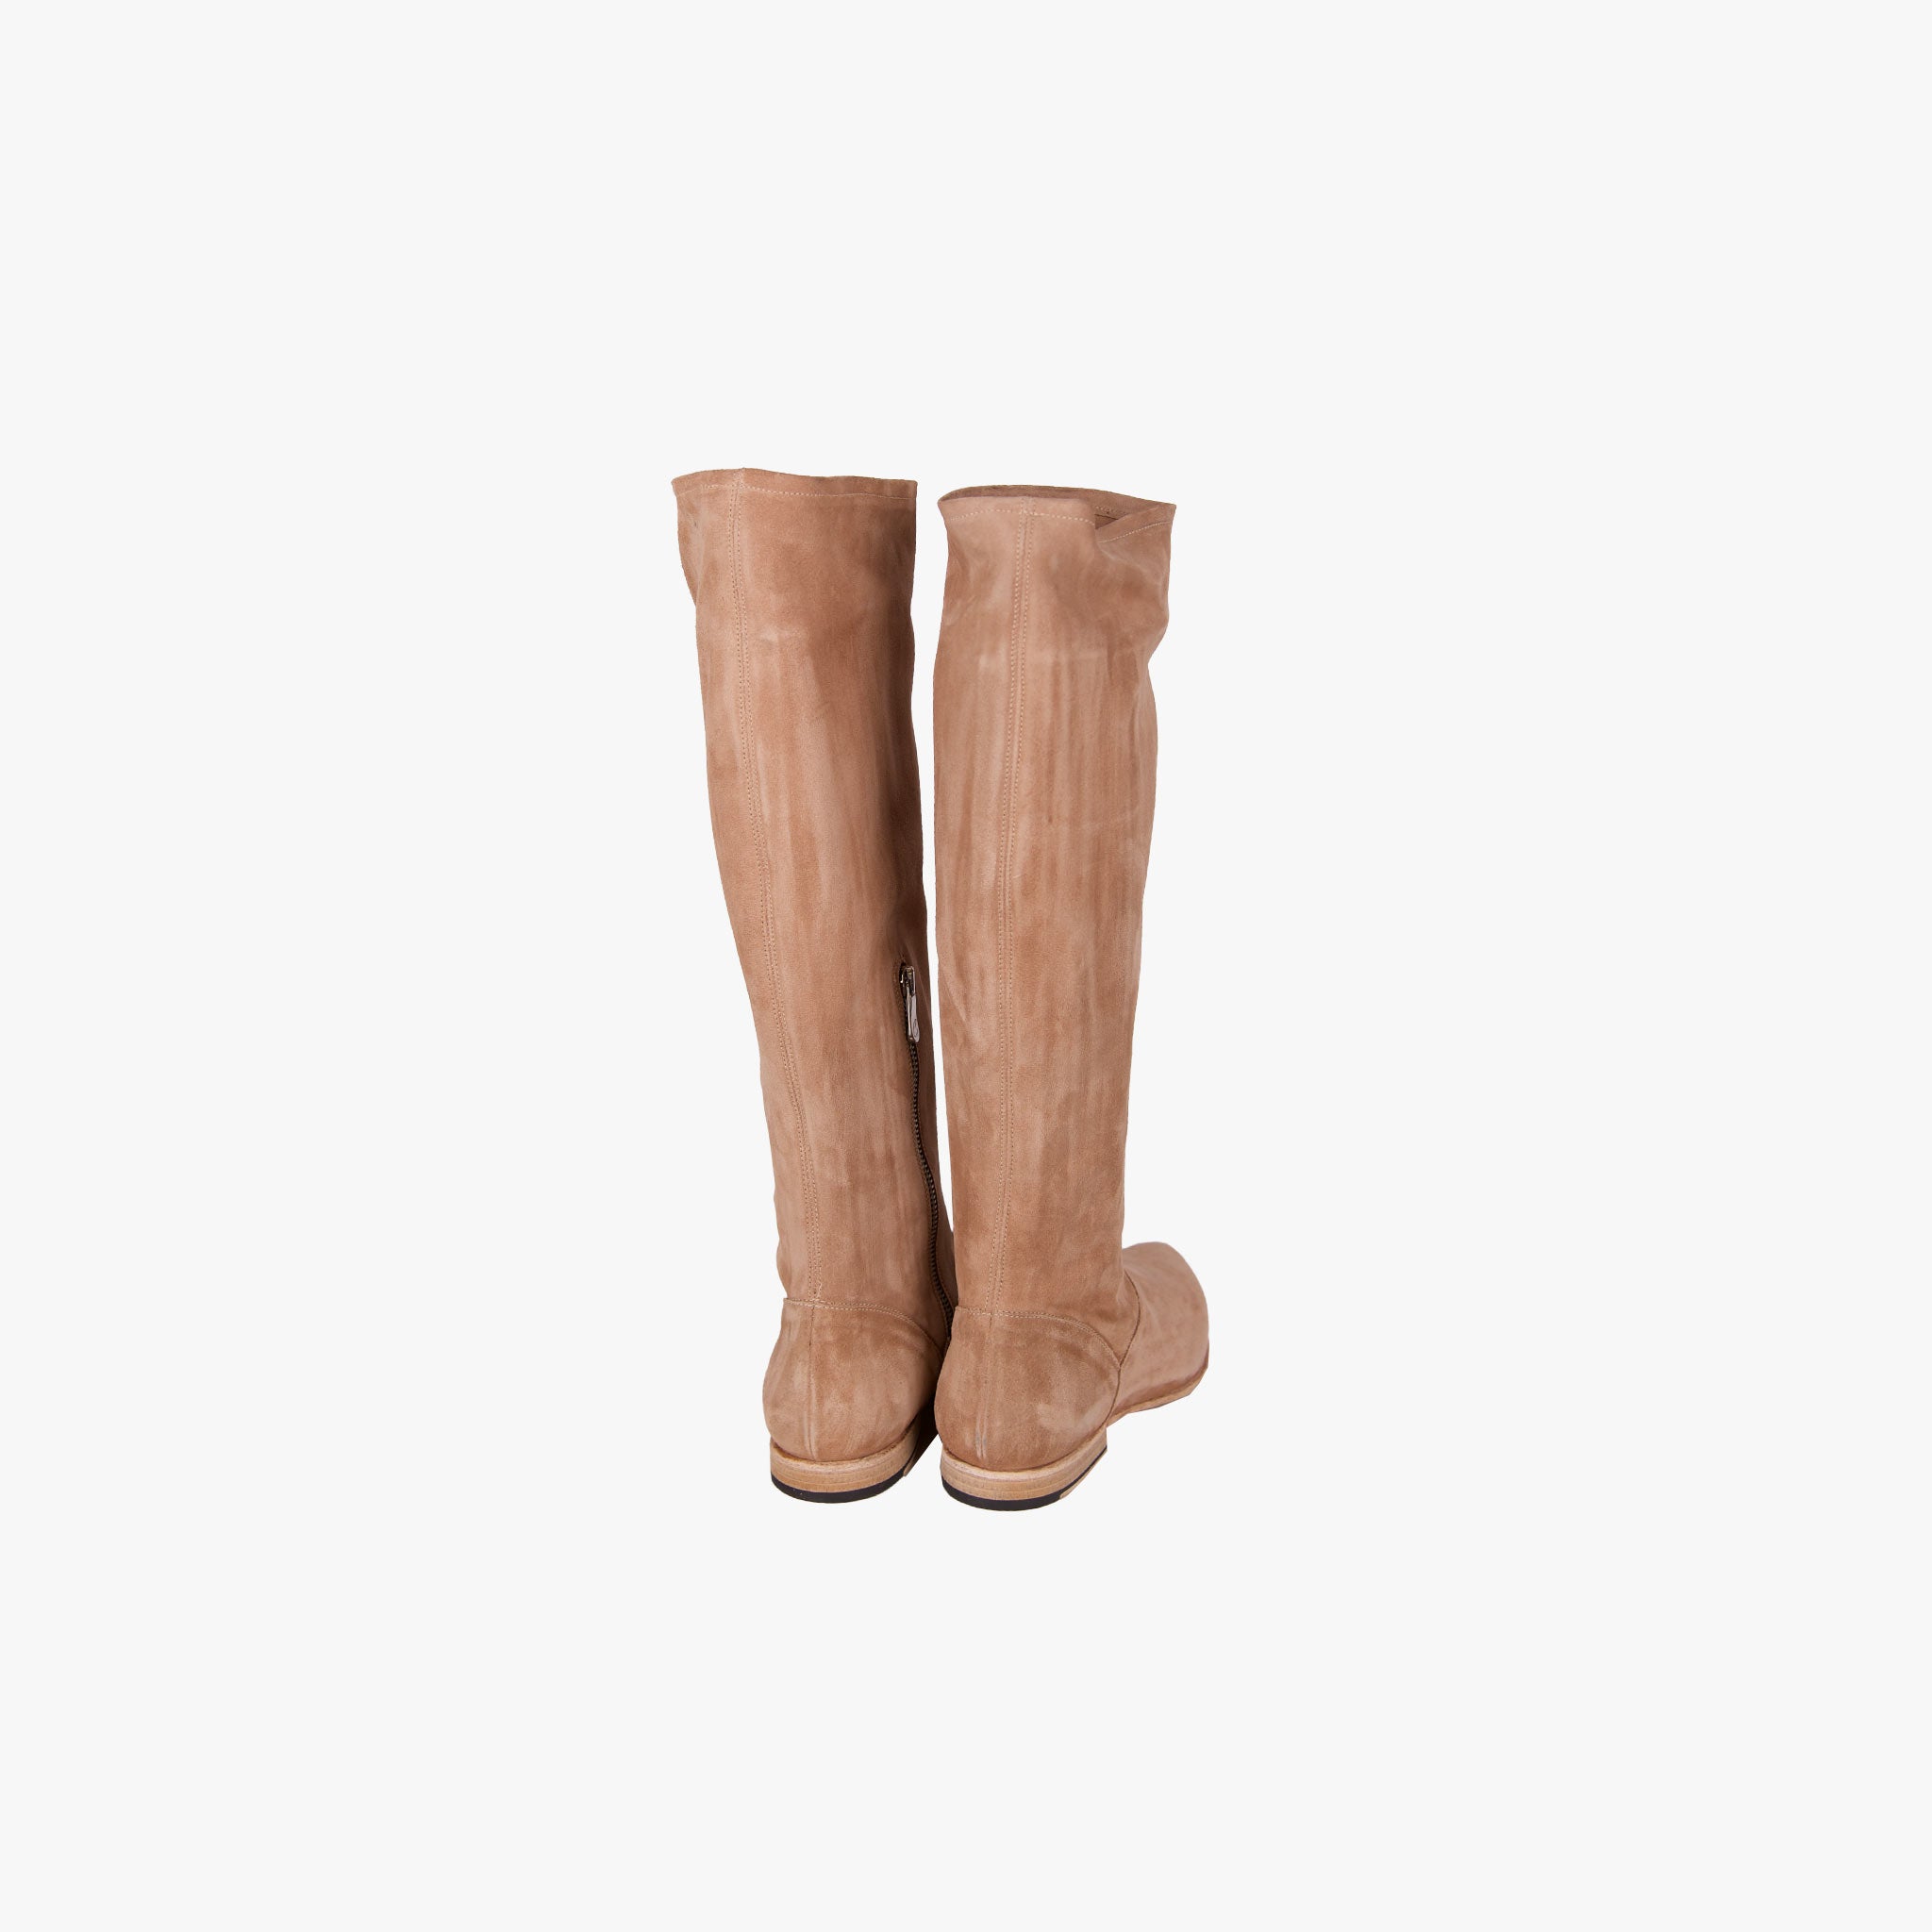 Crispiniano Stiefel Velours | sand